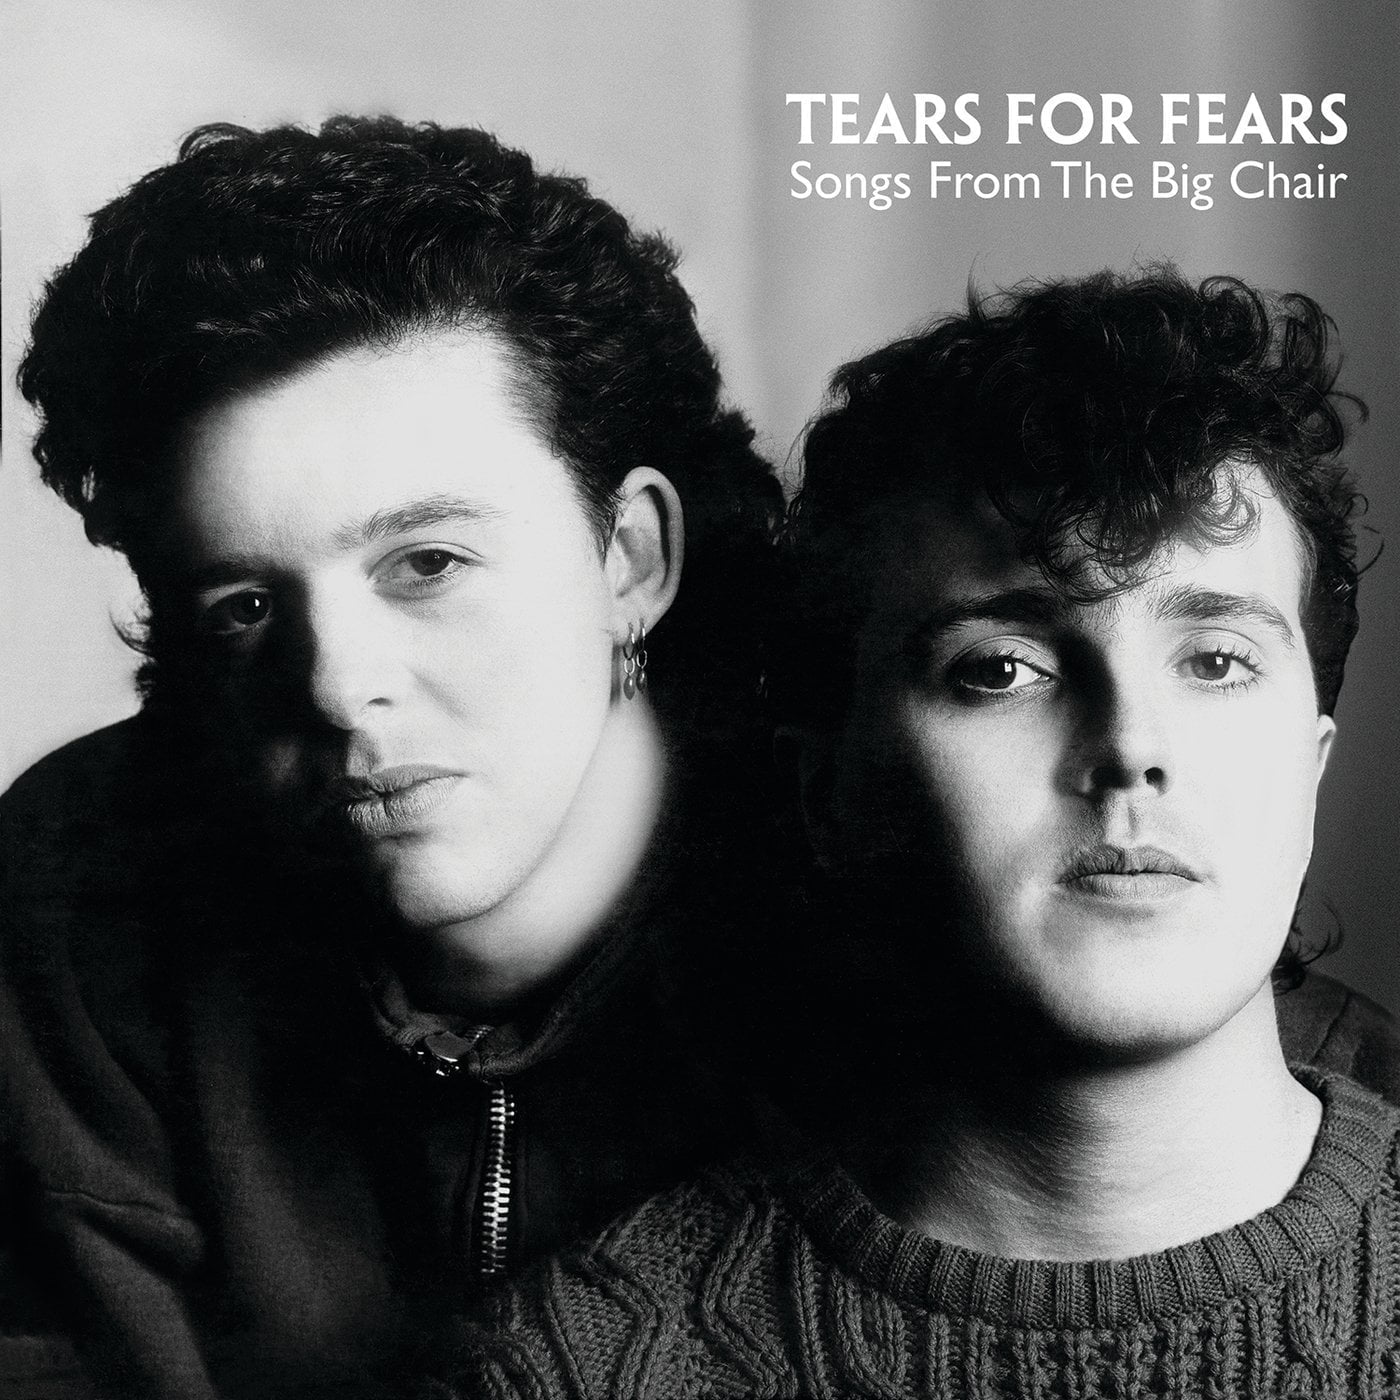 Tears for Fears show is a flashback to the '80s, Stories